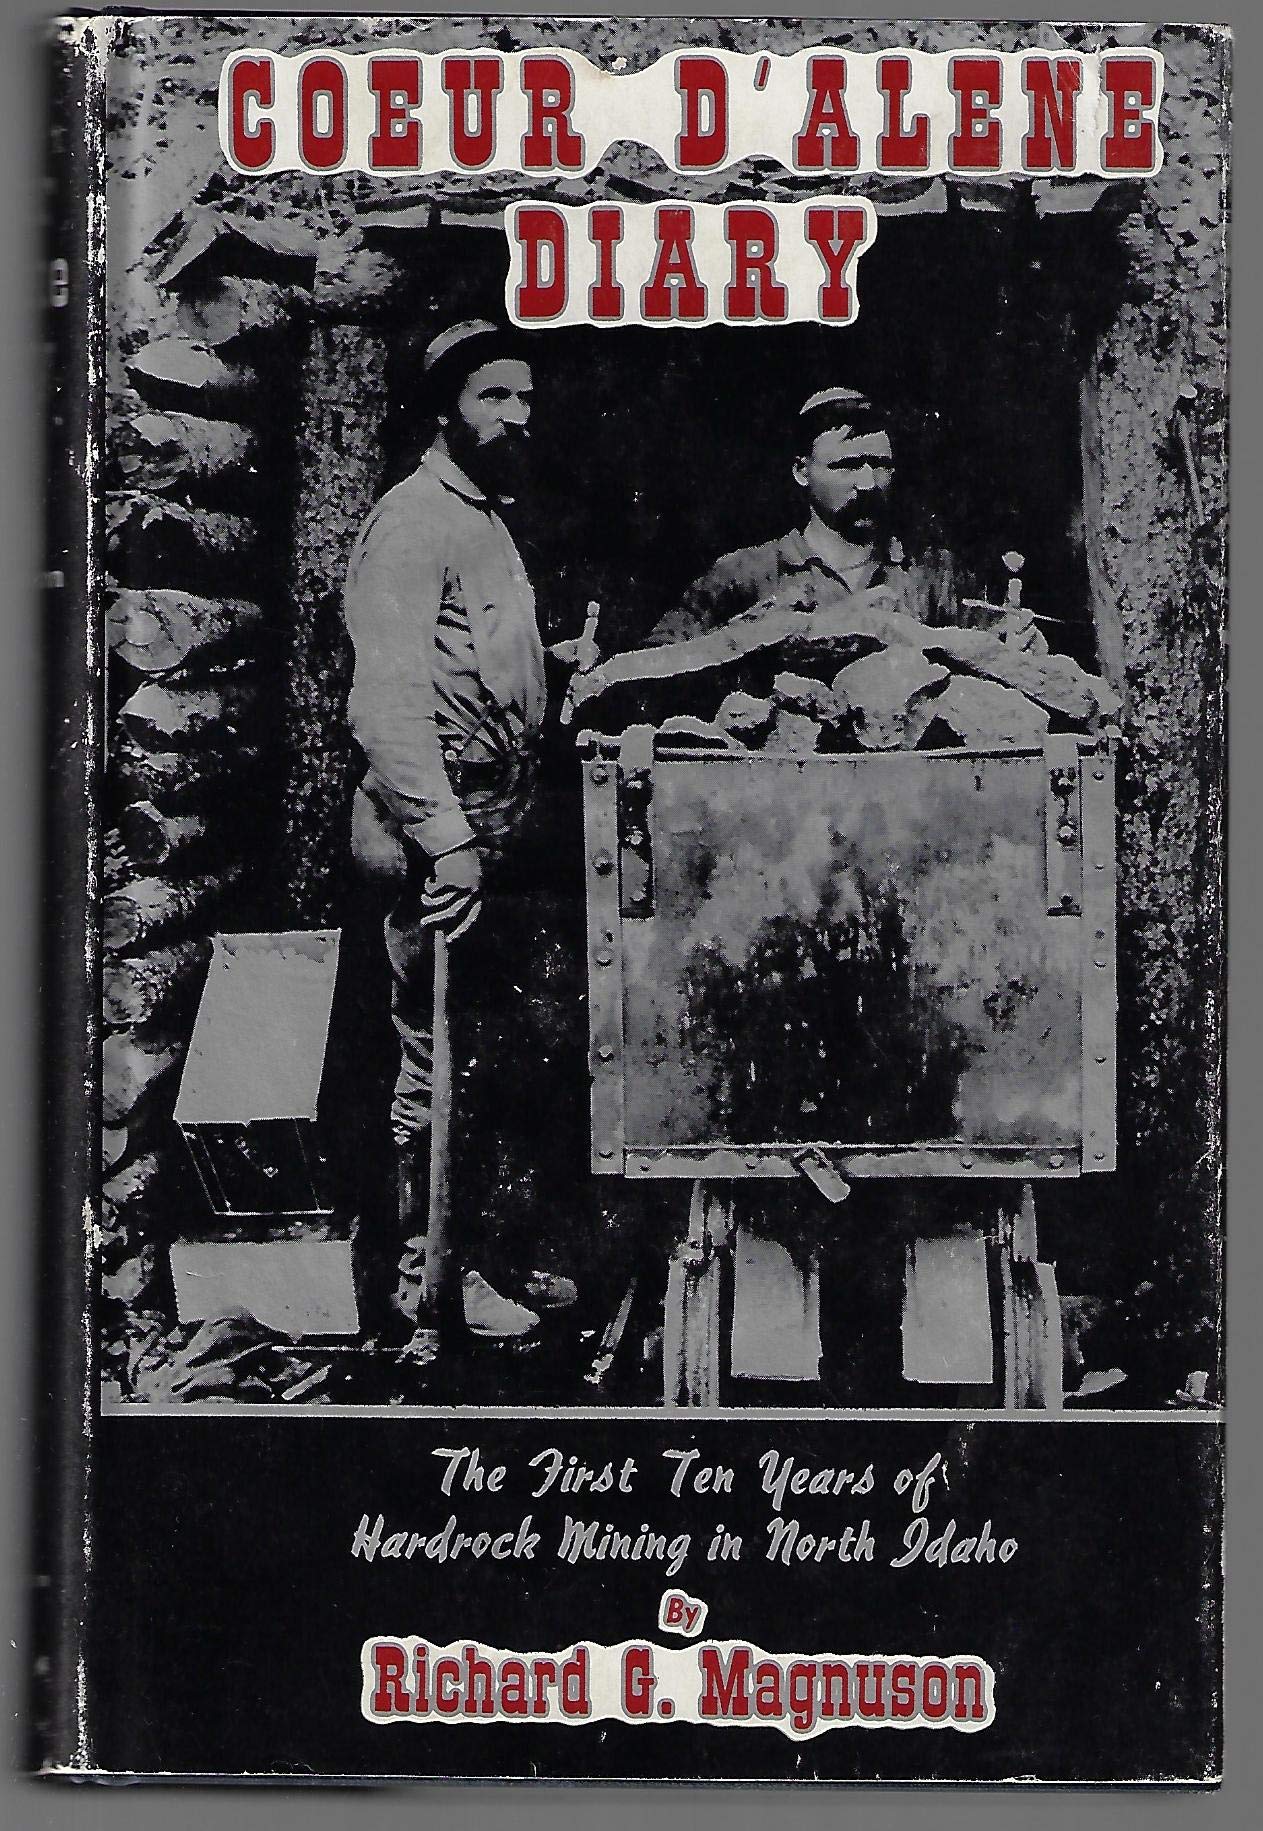 Coeur d'Alene diary: The first ten years of hardrock mining in north Idaho (book cover)